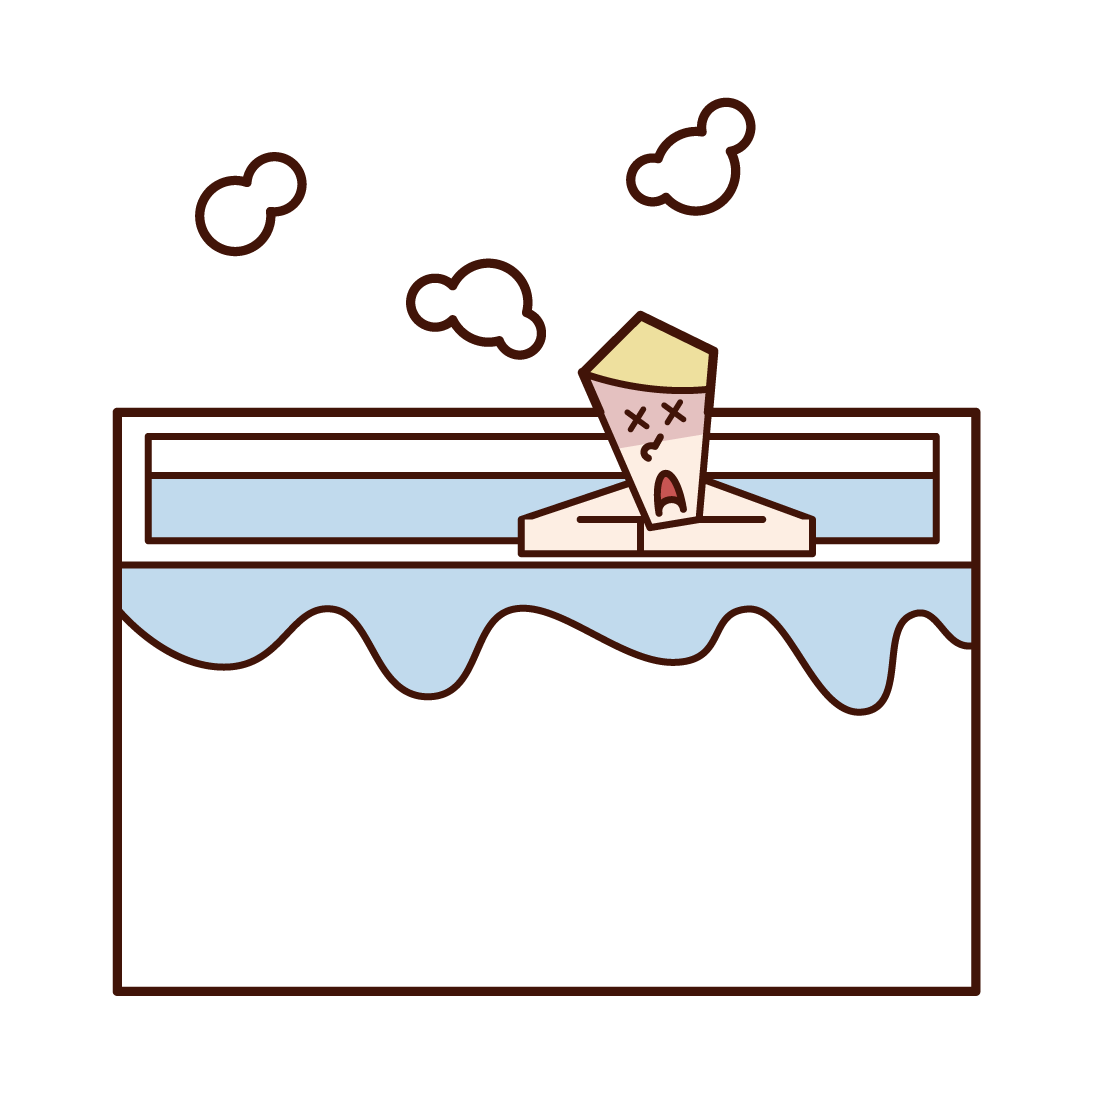 Illustration of a man who can blur in the bath